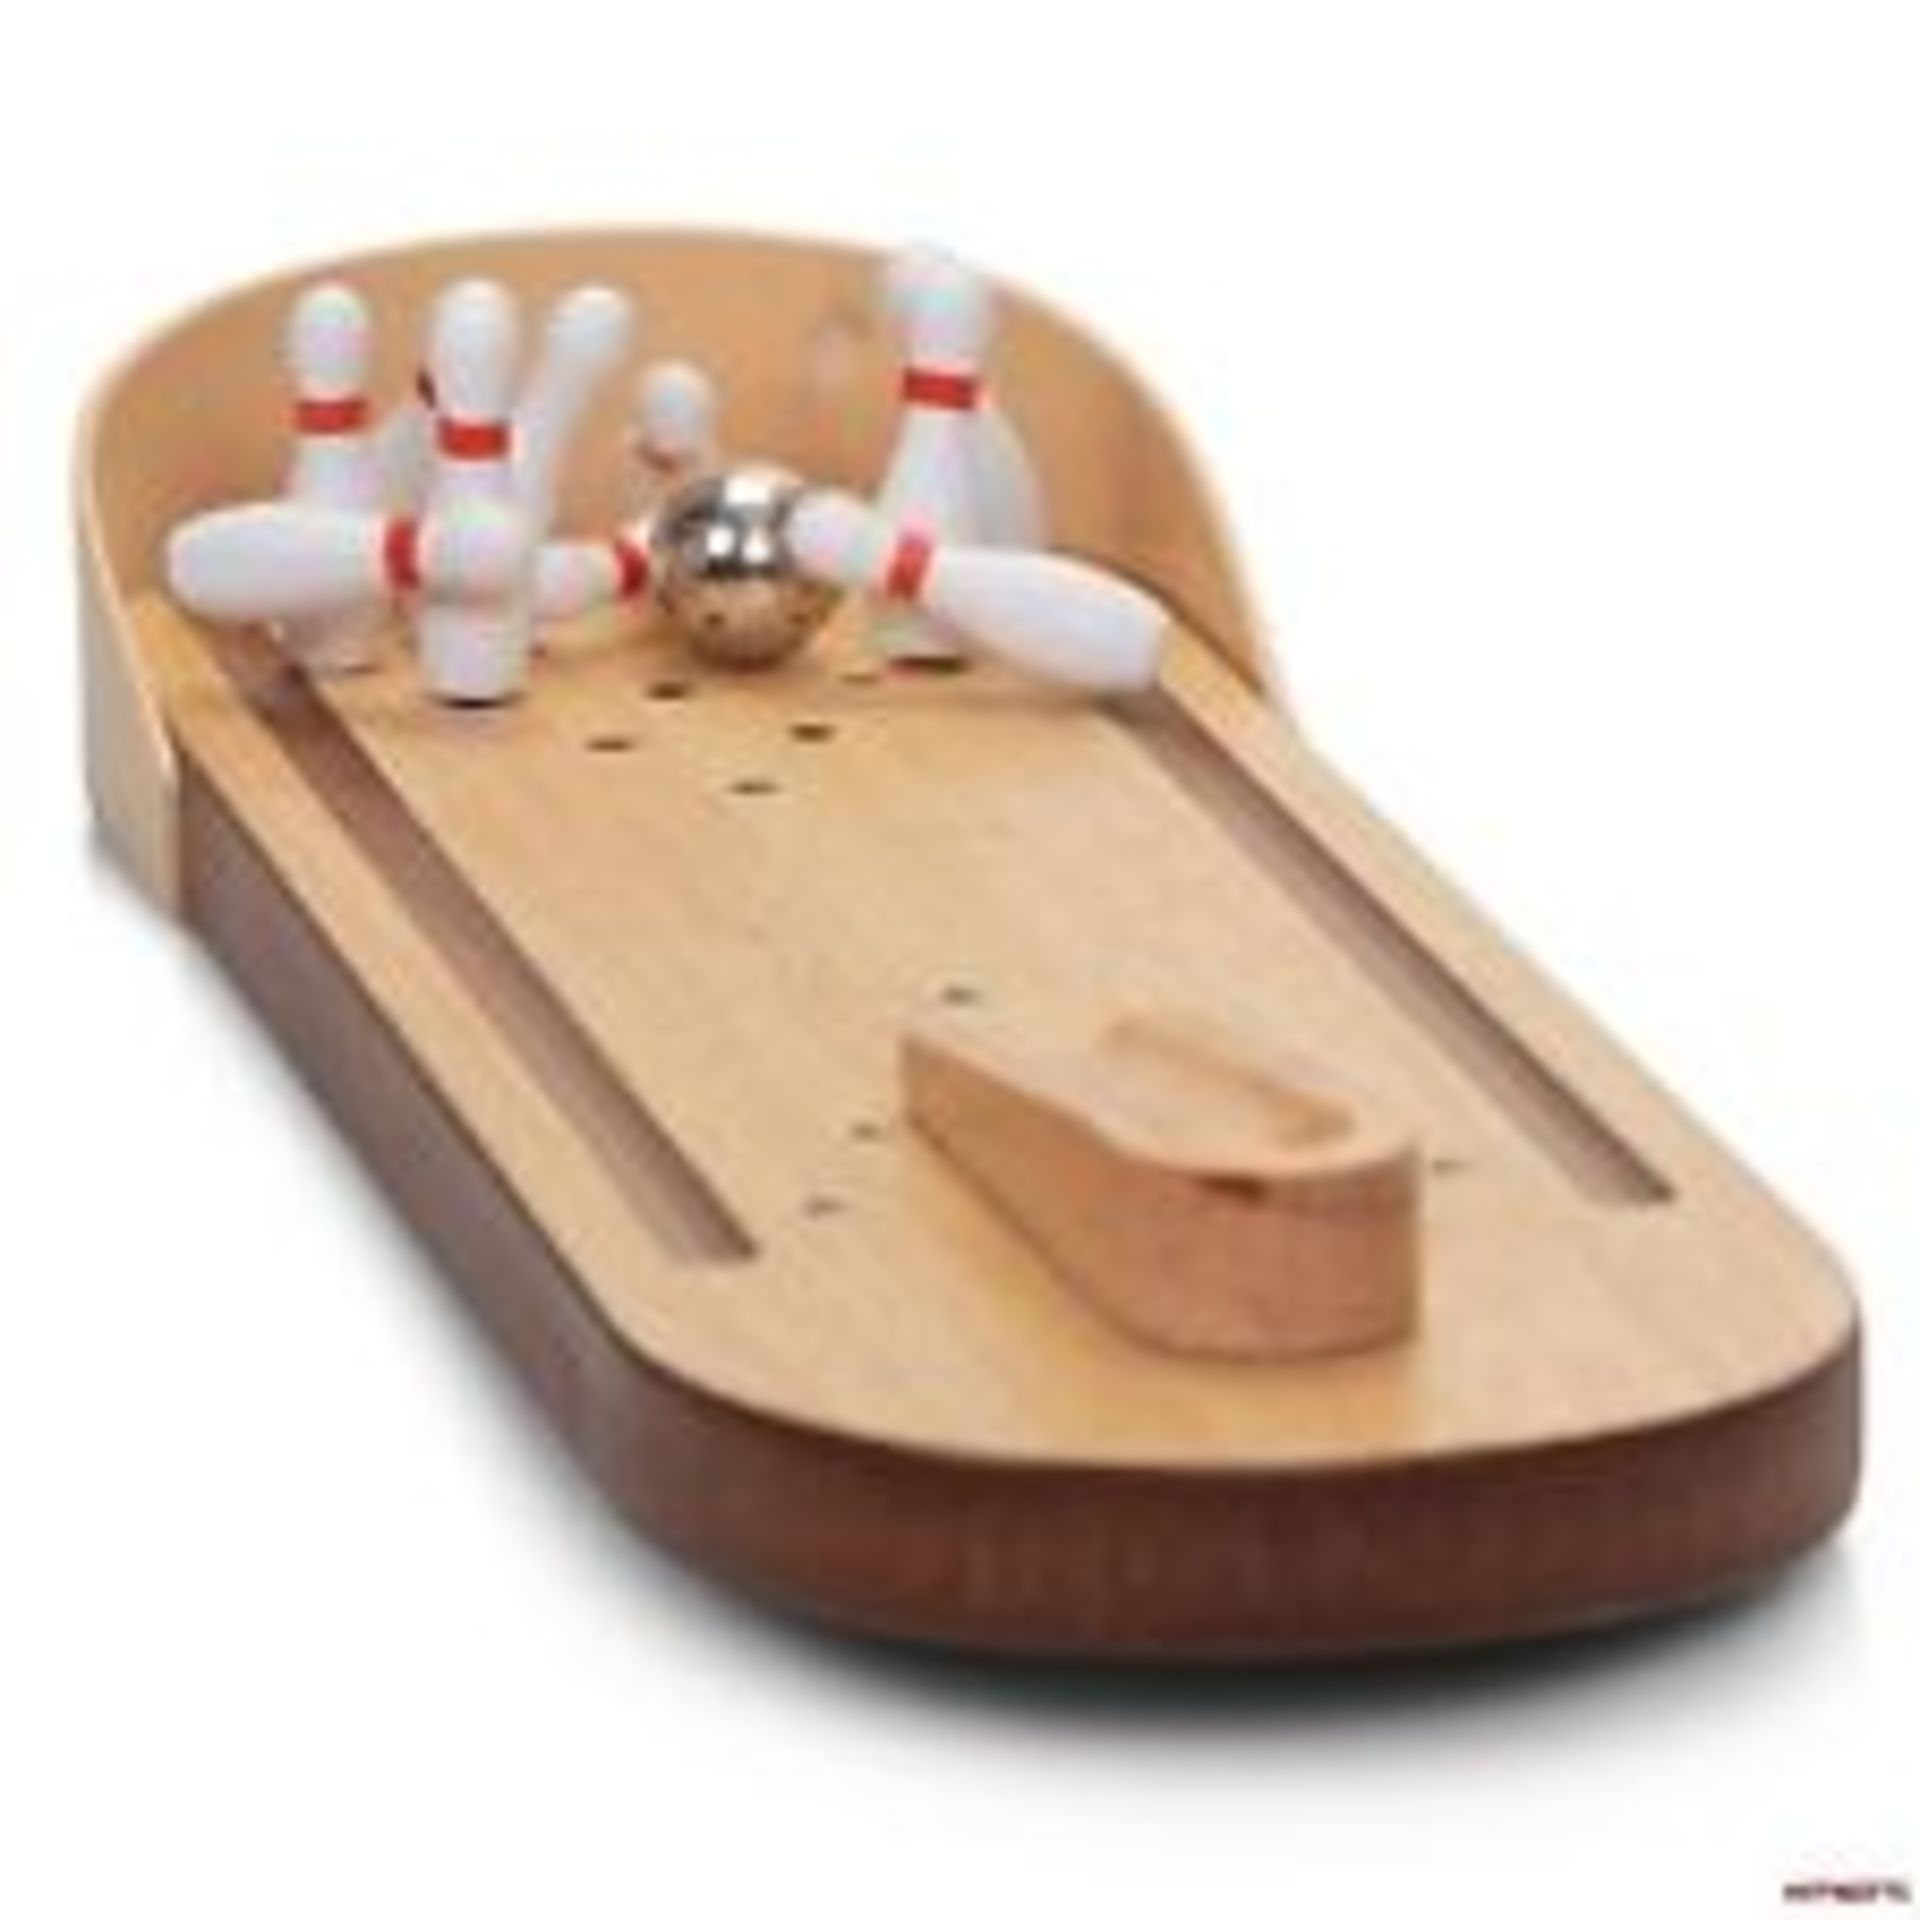 V *TRADE QTY* Brand New Ten Pin Bowling Alley Game X 8 YOUR BID PRICE TO BE MULTIPLIED BY EIGHT